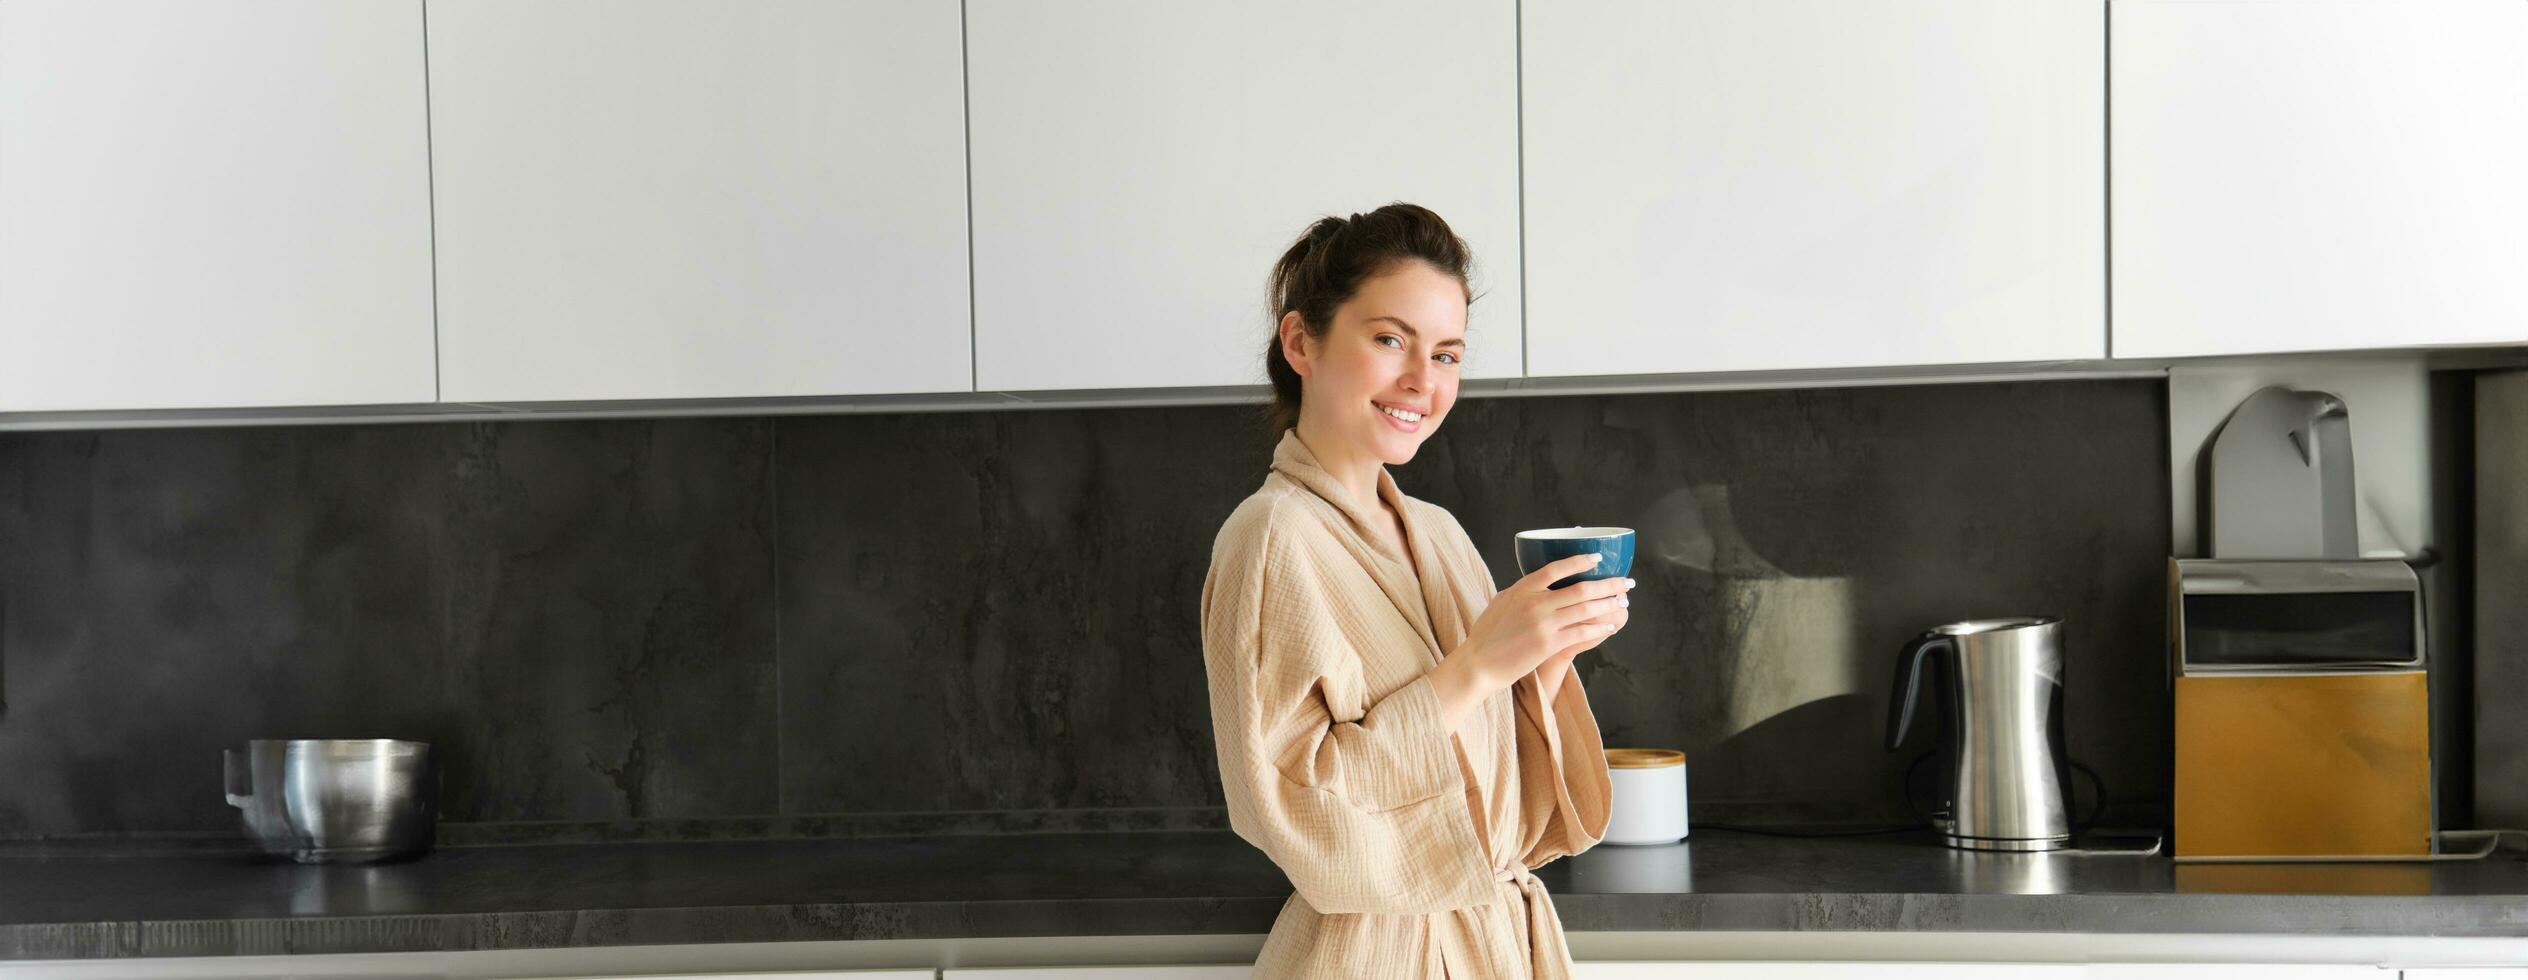 Daily routine and lifestyle. Young beautiful woman in bathrobe, standing in kitchen with cup of coffee, drinking tea, smiling and looking happy photo